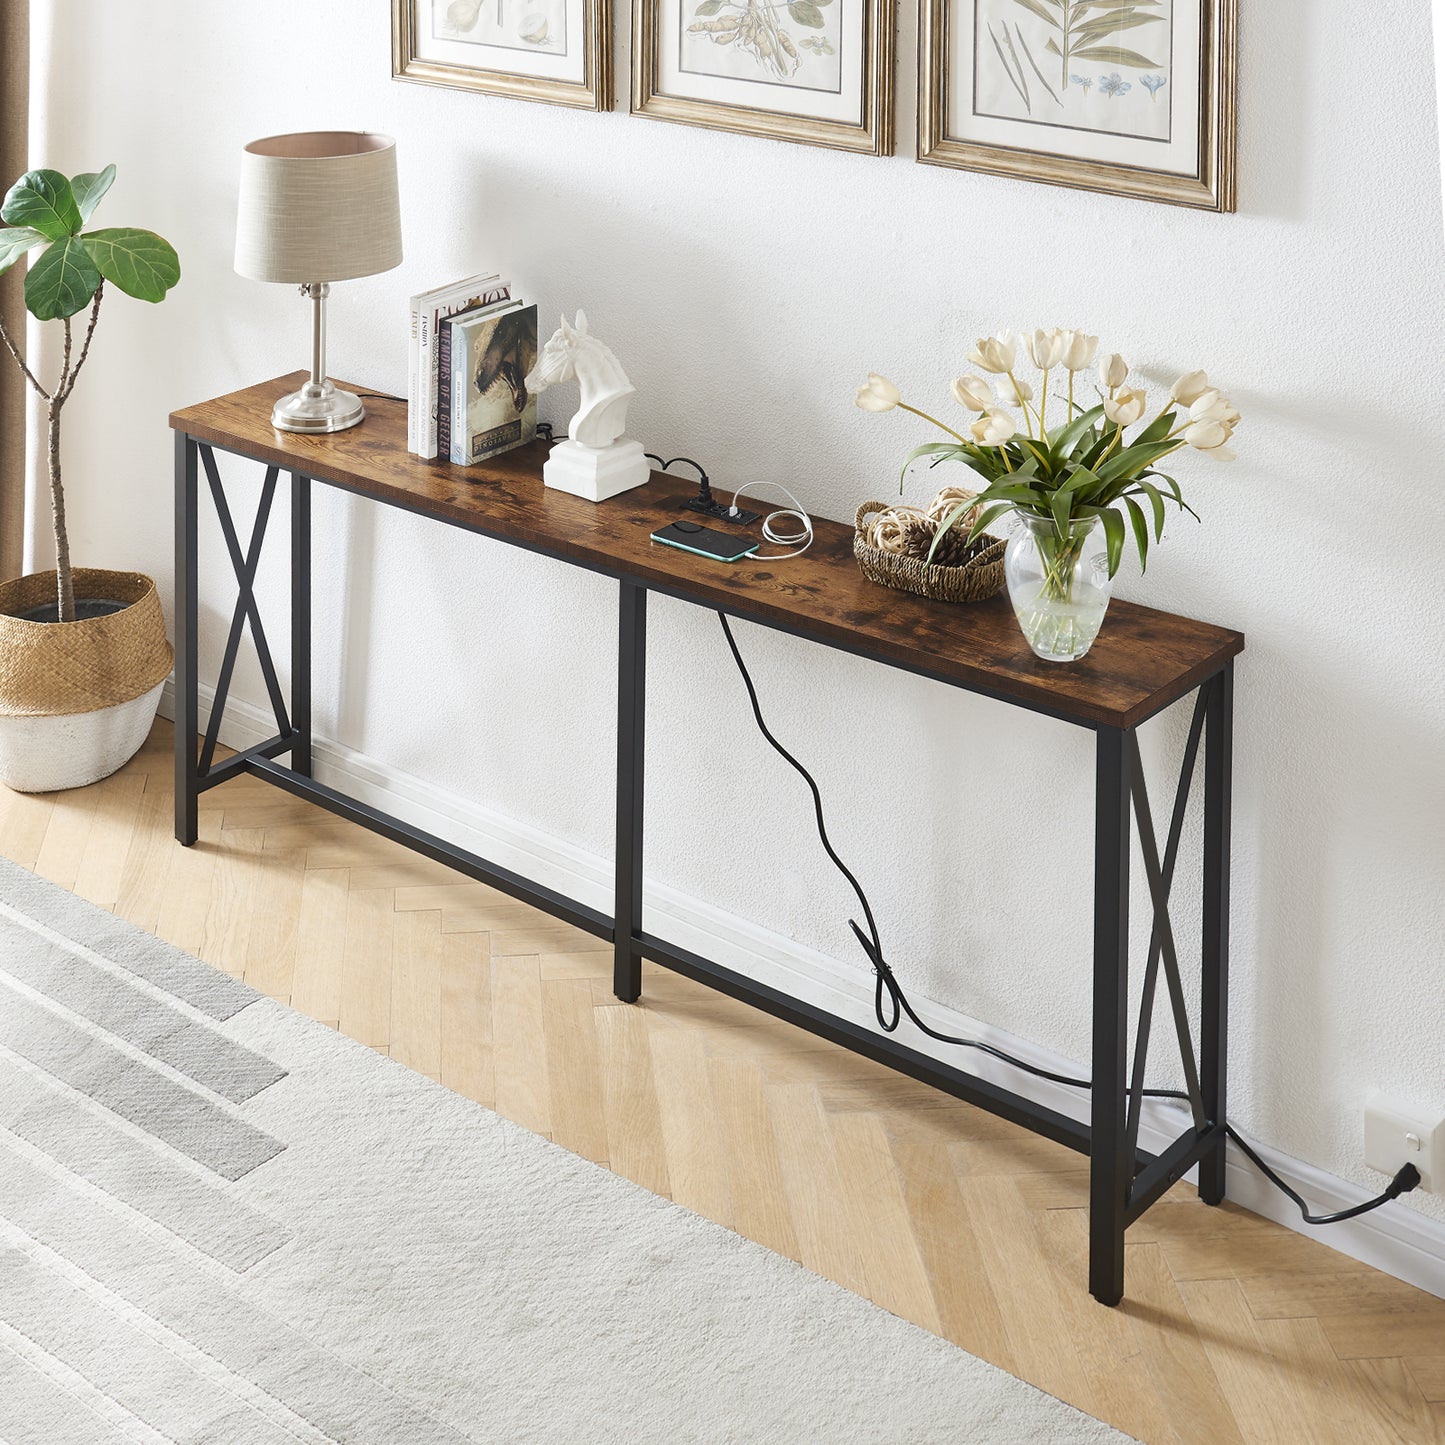 SUPERJARE 70.9 Inch Console Table with 2 Outlet and 2 USB Ports - Rustic Brown, 7922FC